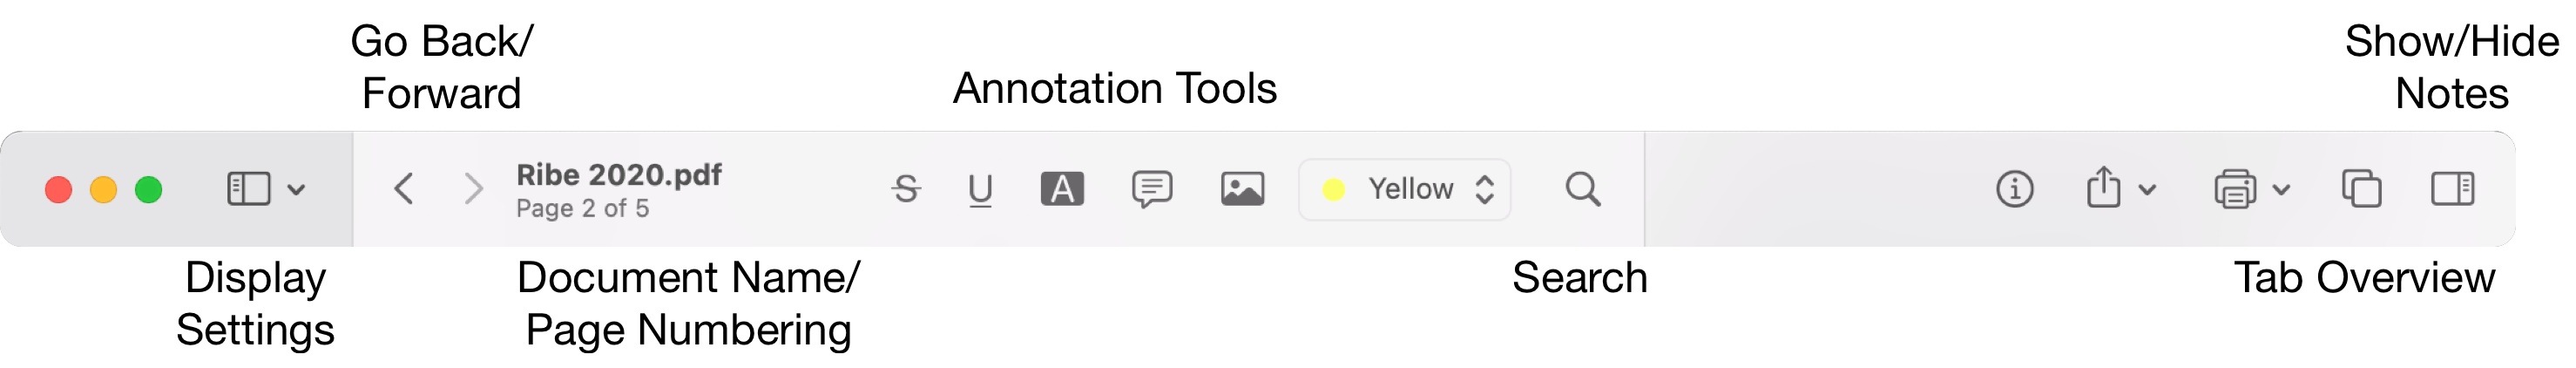 Highlights toolbar with labels from macOS 11 Big Sur